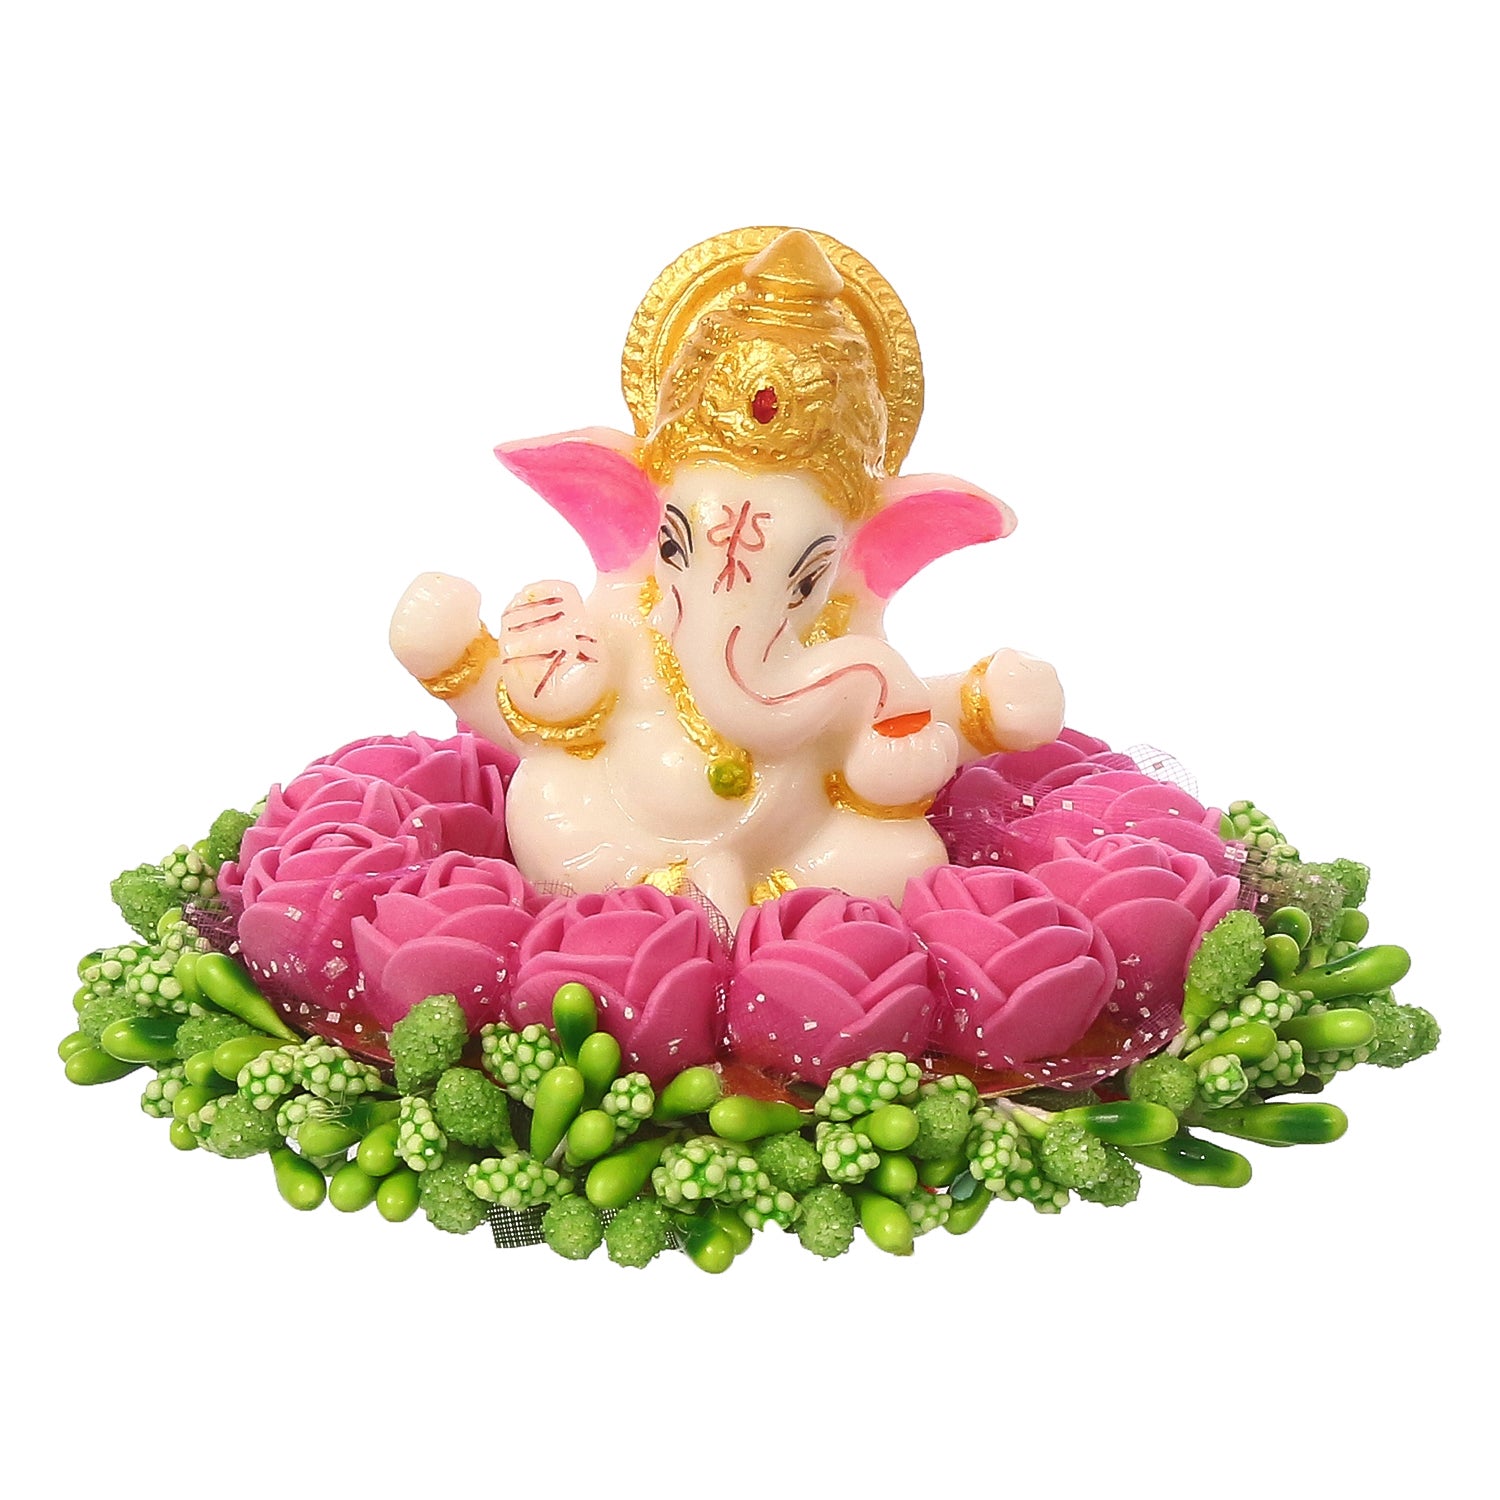 Lord Ganesha Idol On Decorative Handcrafted Pink Flowers Plate 2